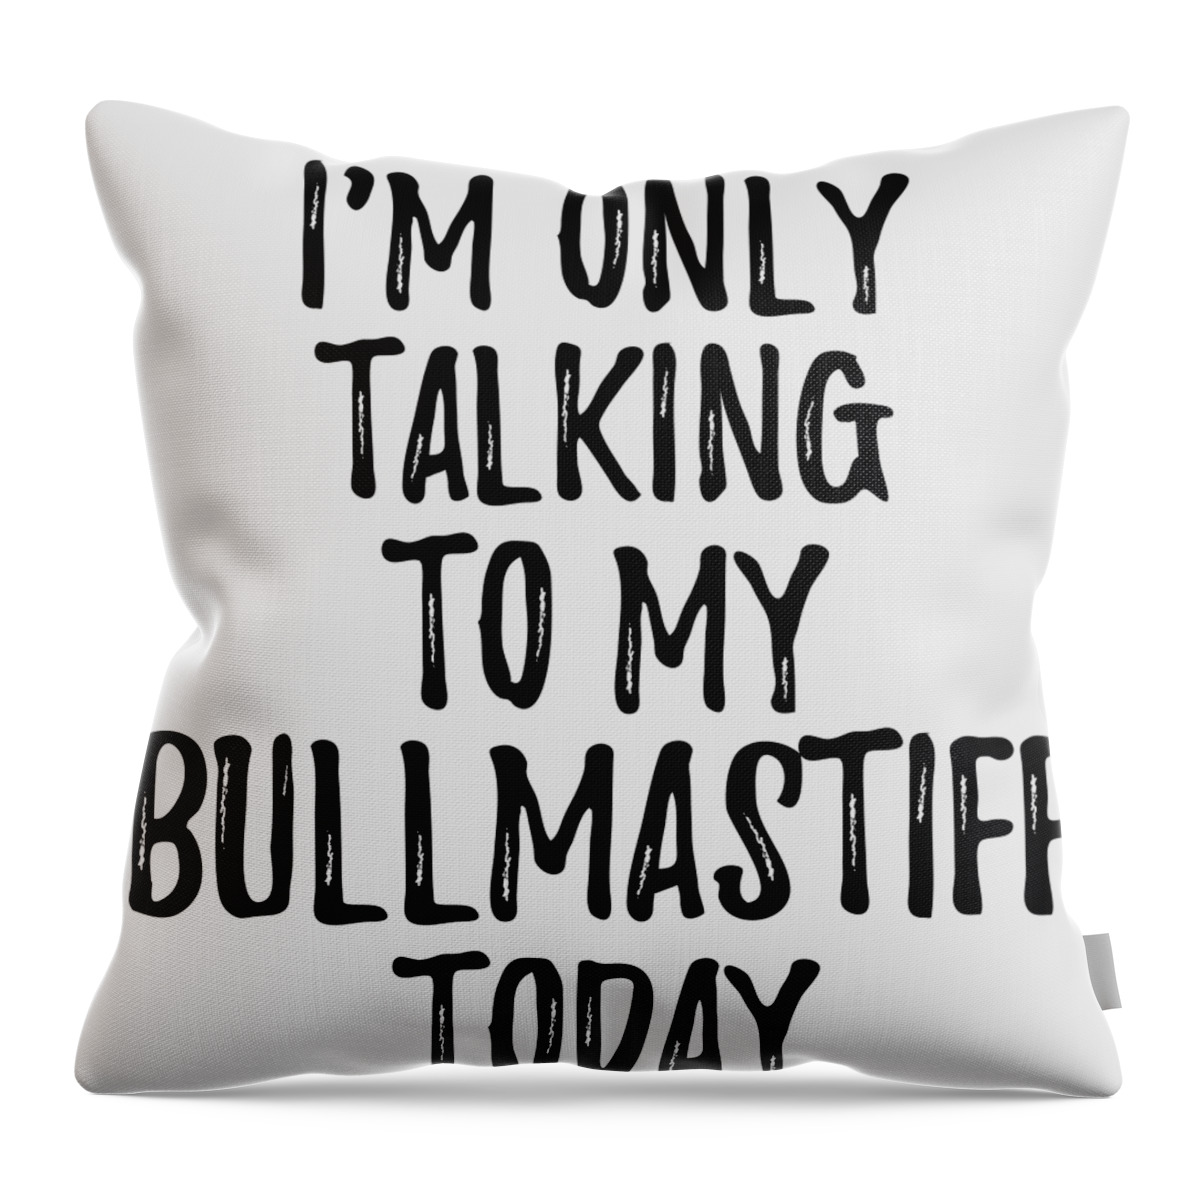 Bullmastiff Throw Pillow featuring the digital art I Am Only Talking To My Bullmastiff Today by Jeff Creation